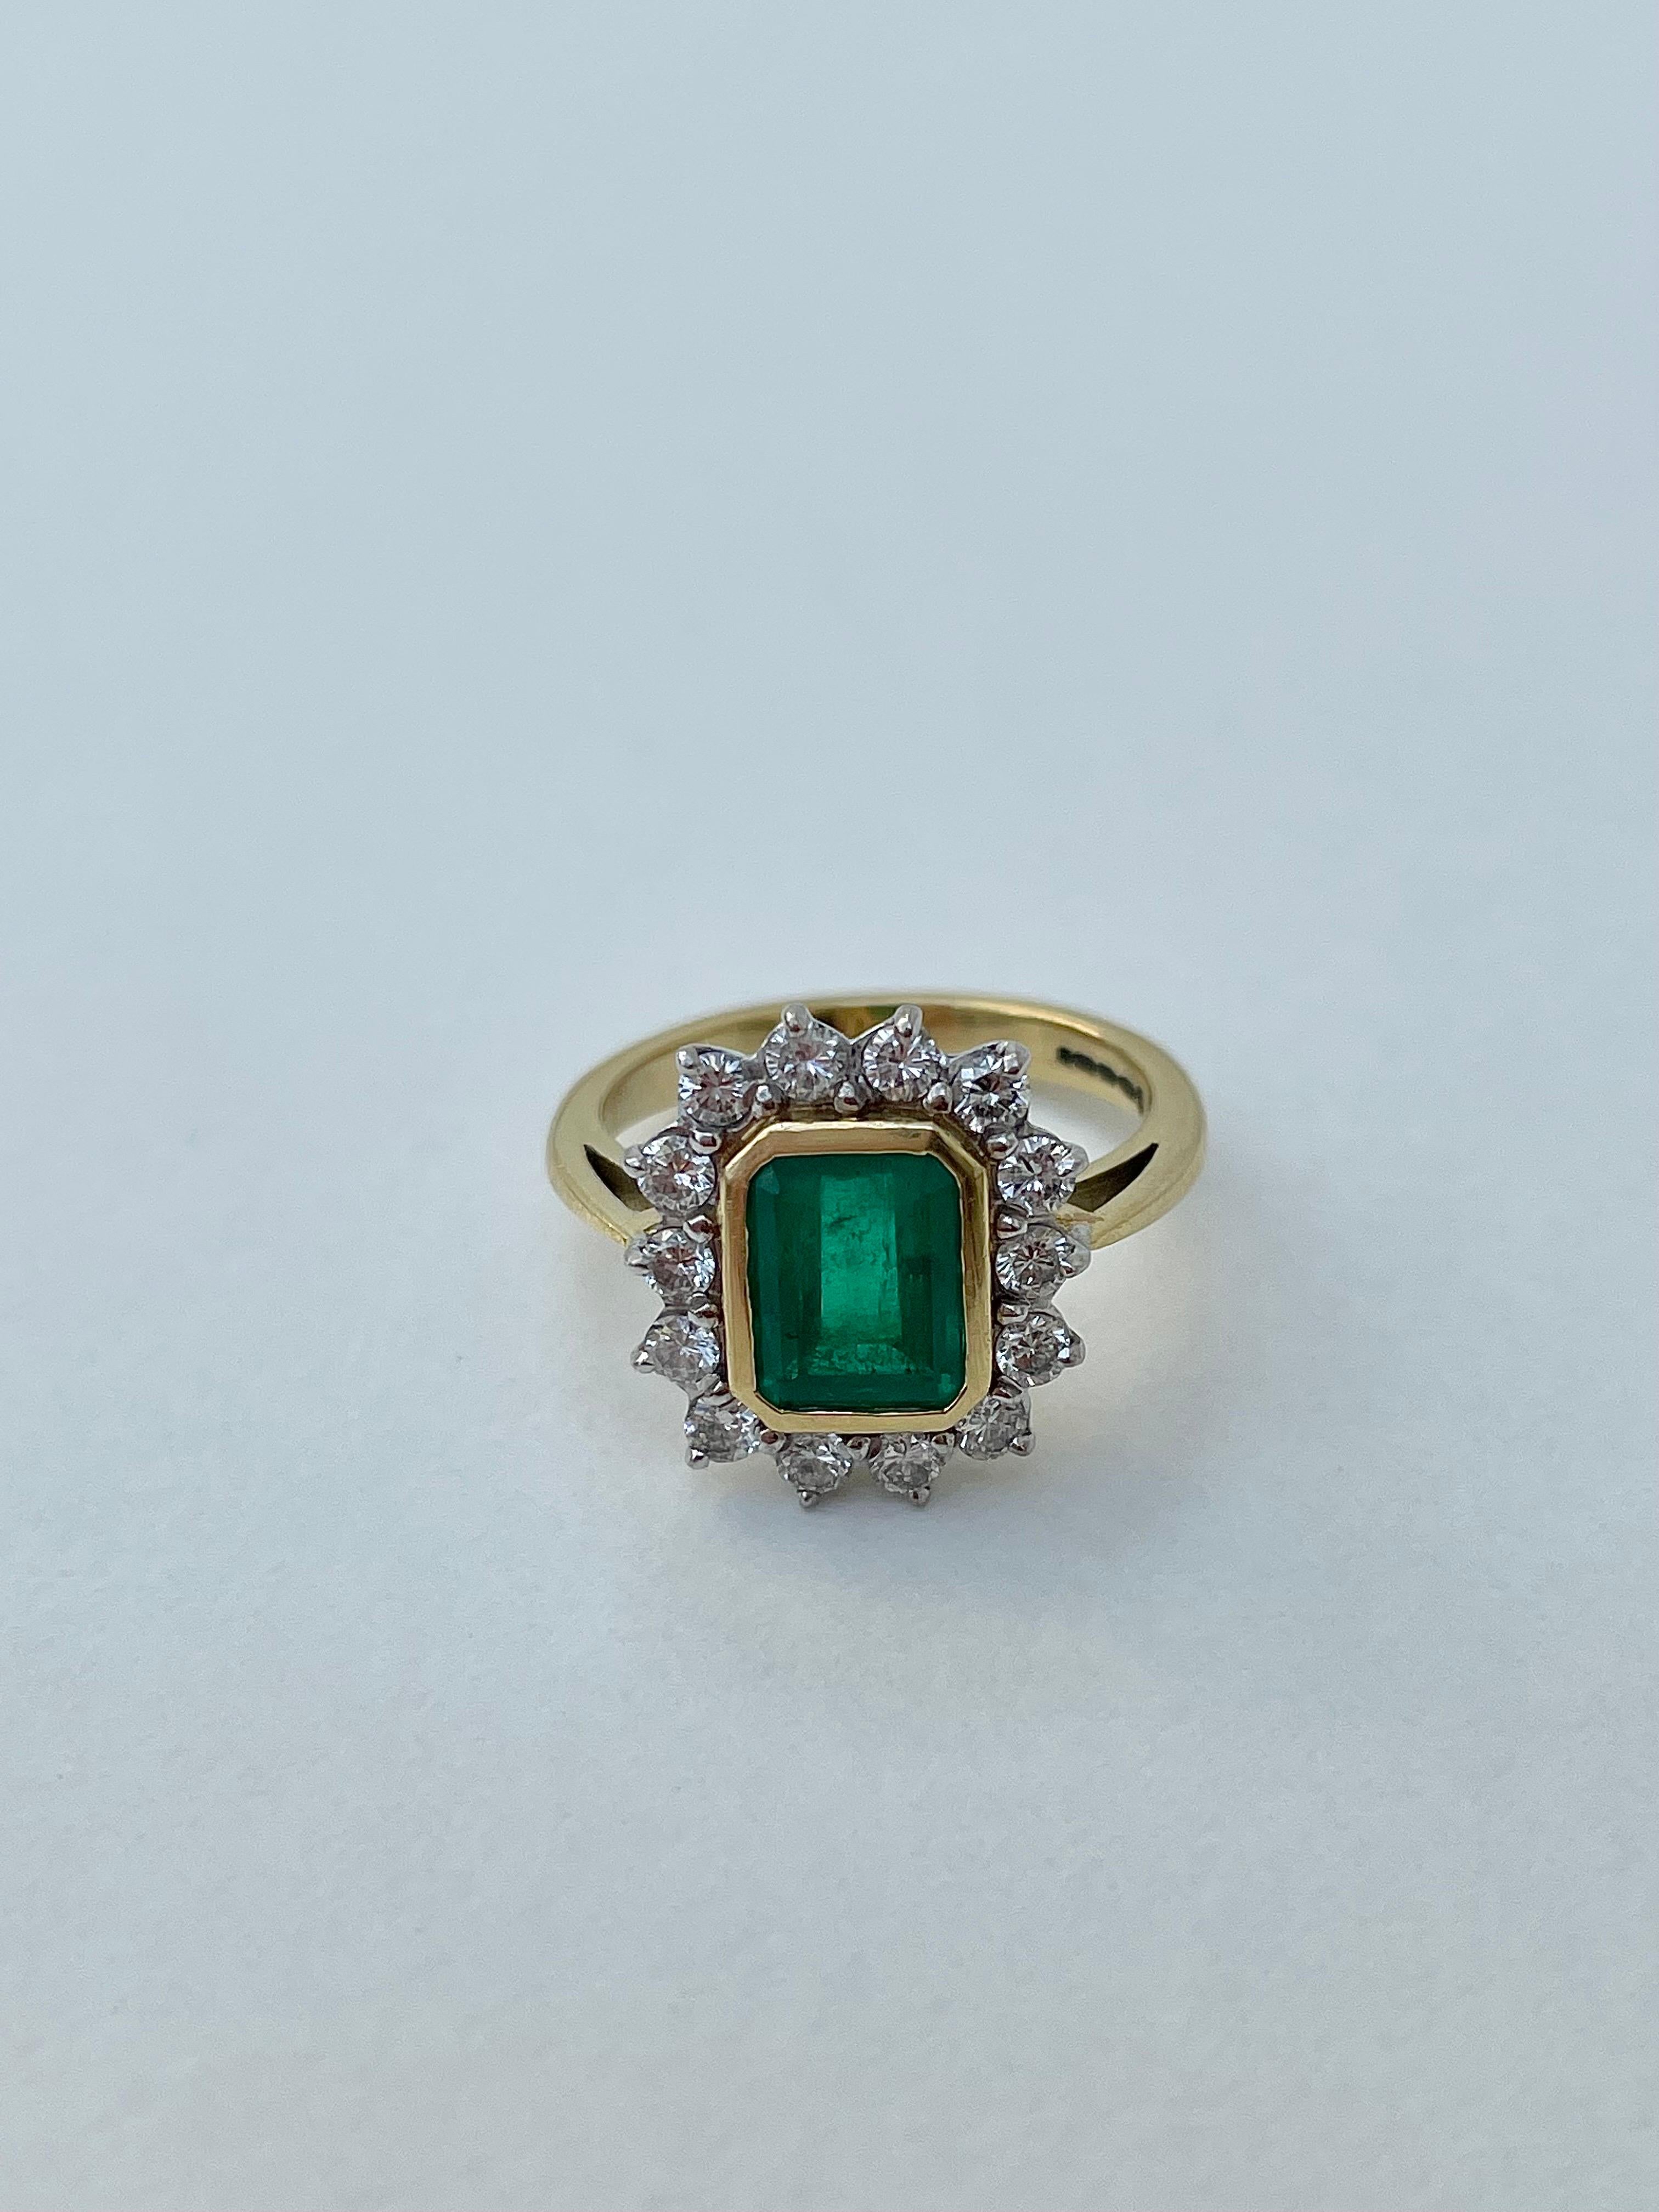 Vintage Emerald and Diamond Halo Ring, 18ct Yellow Gold 

outstanding diamond and emerald ring, it’s an incredible statement piece 

The item comes without the box in the photos but will be presented in a  gift box

Measurements: weight 6.43g, size